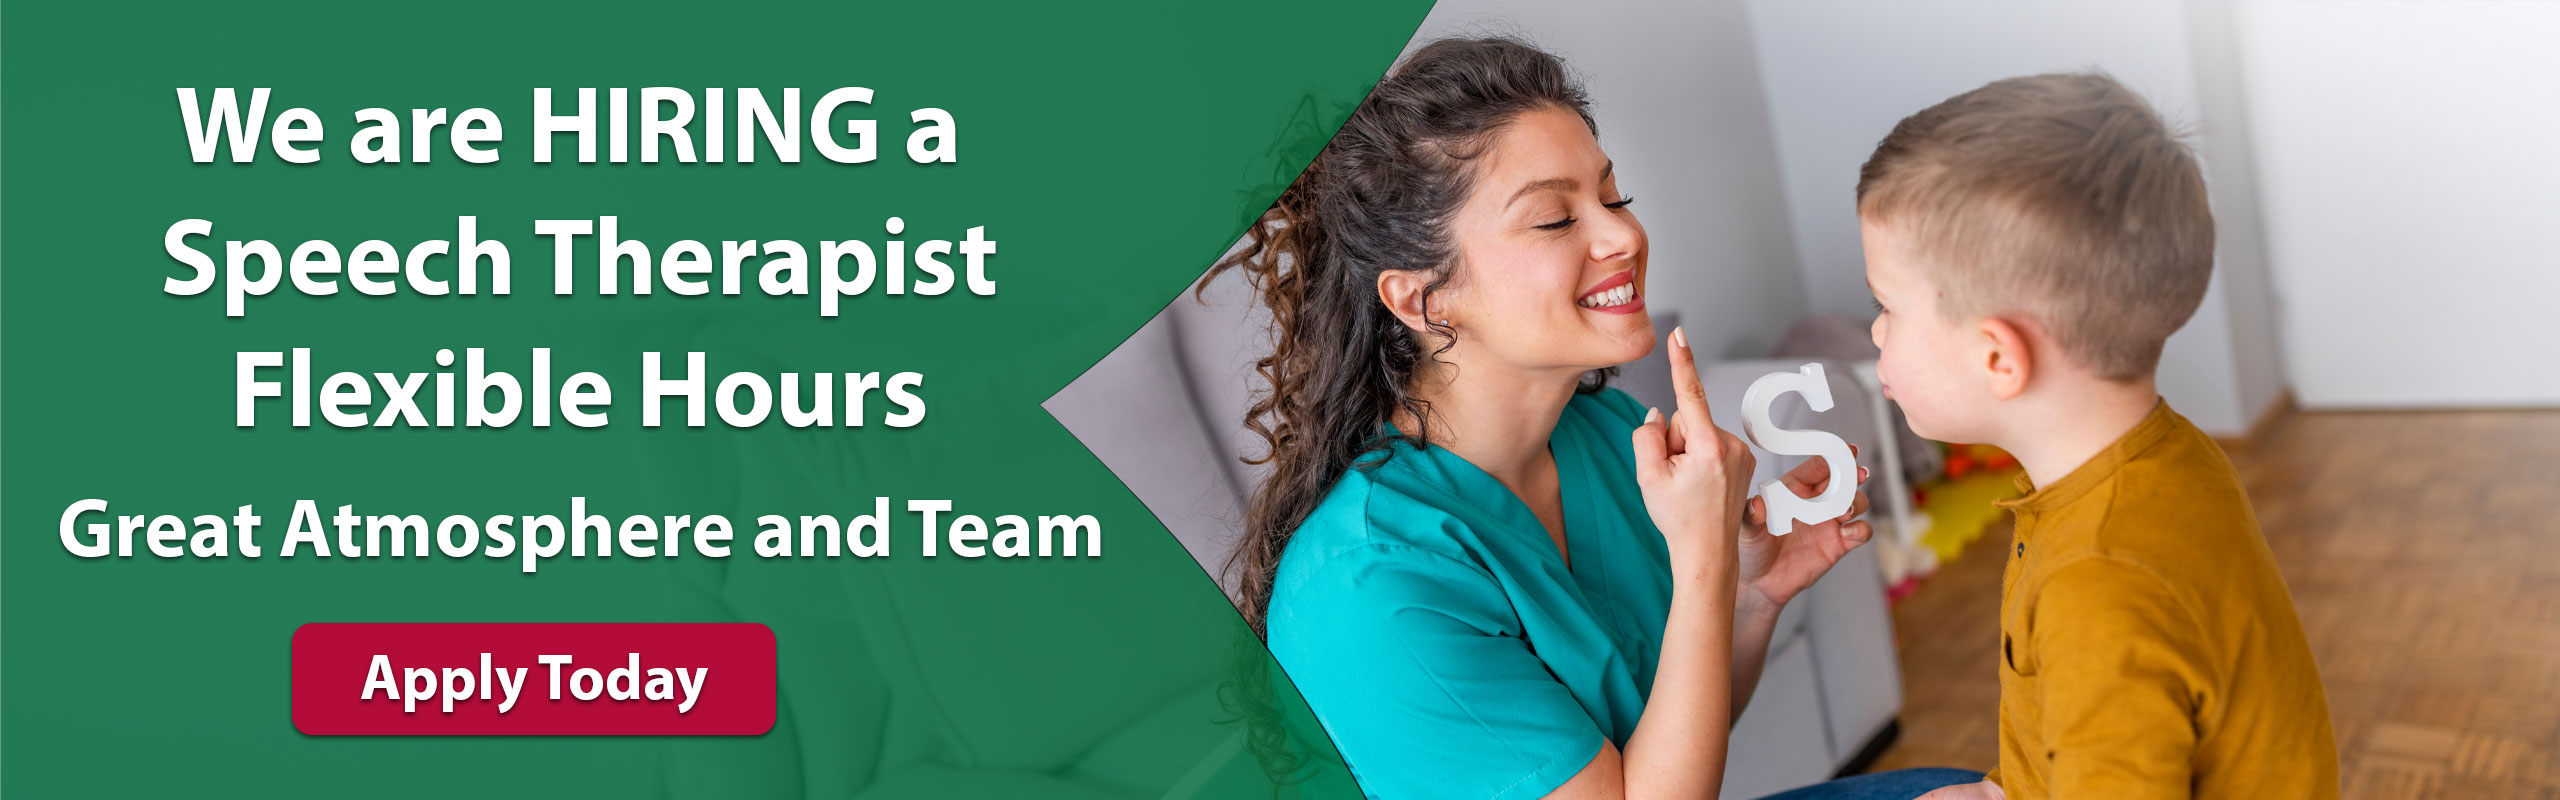 We are HIRING a Speech Therapist Flexible Hours
Great Atmosphere and Team 
Apply Today